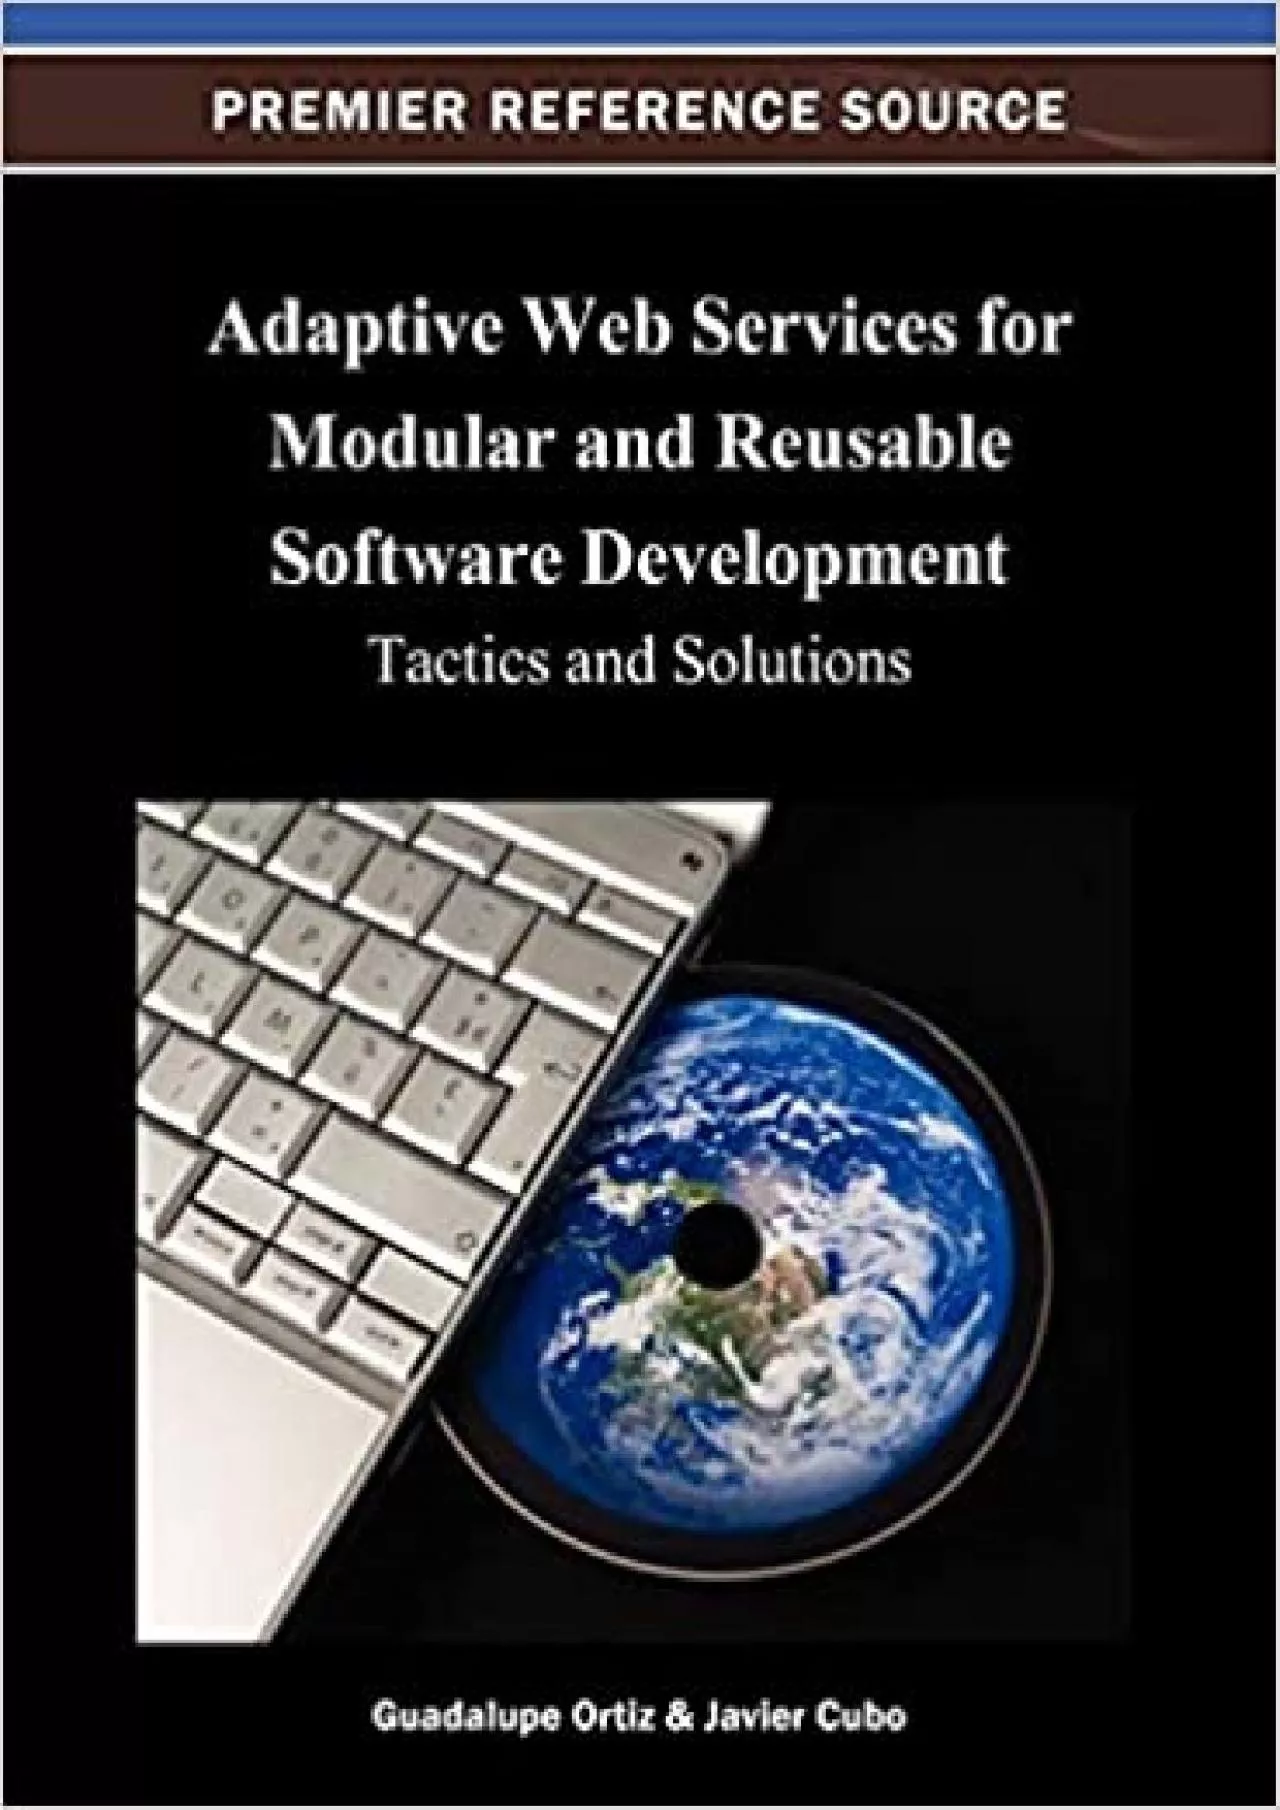 (EBOOK)-Adaptive Web Services for Modular and Reusable Software Development Tactics and